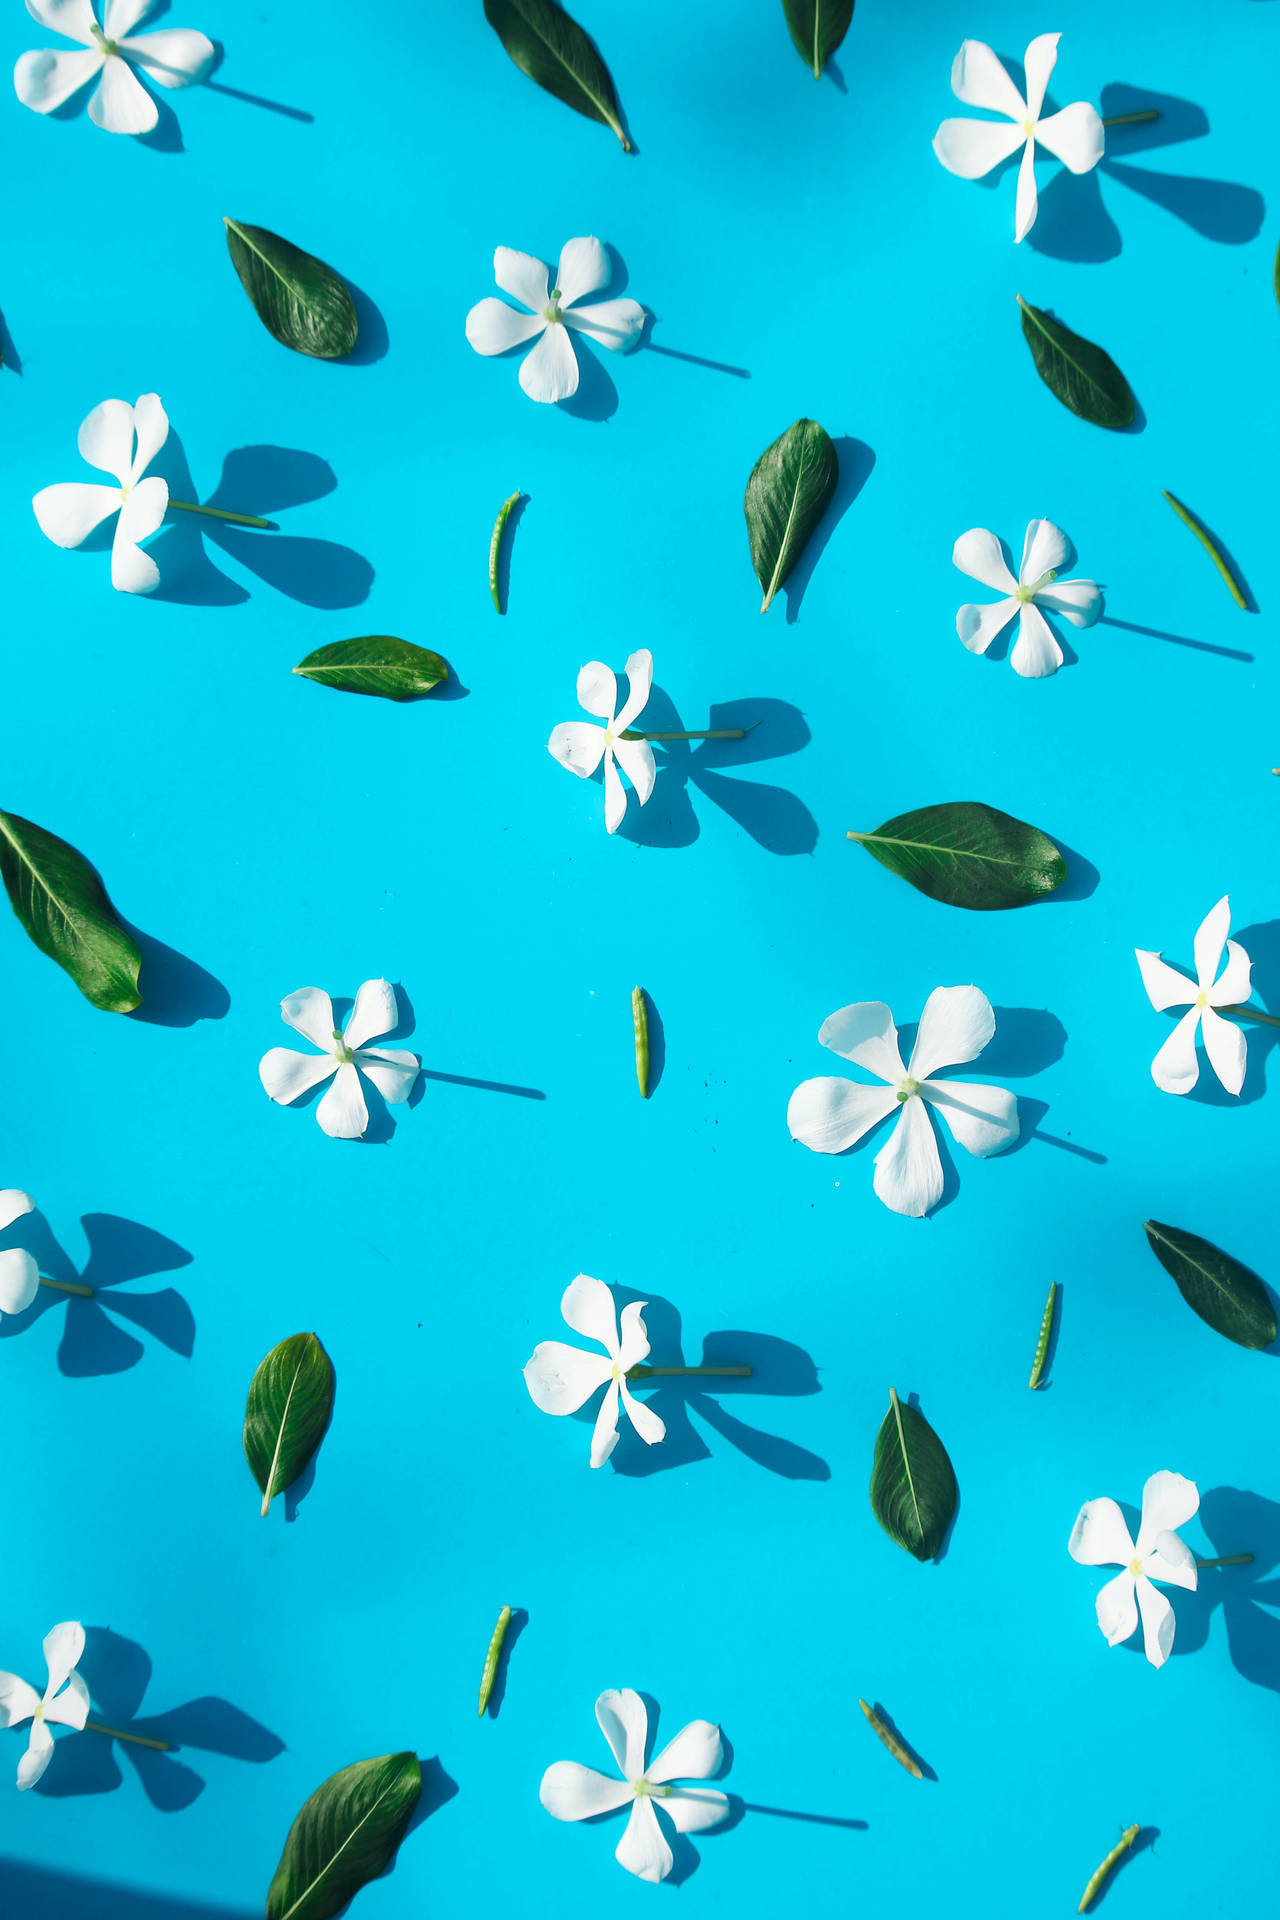 Cute Floral Blue And White Background